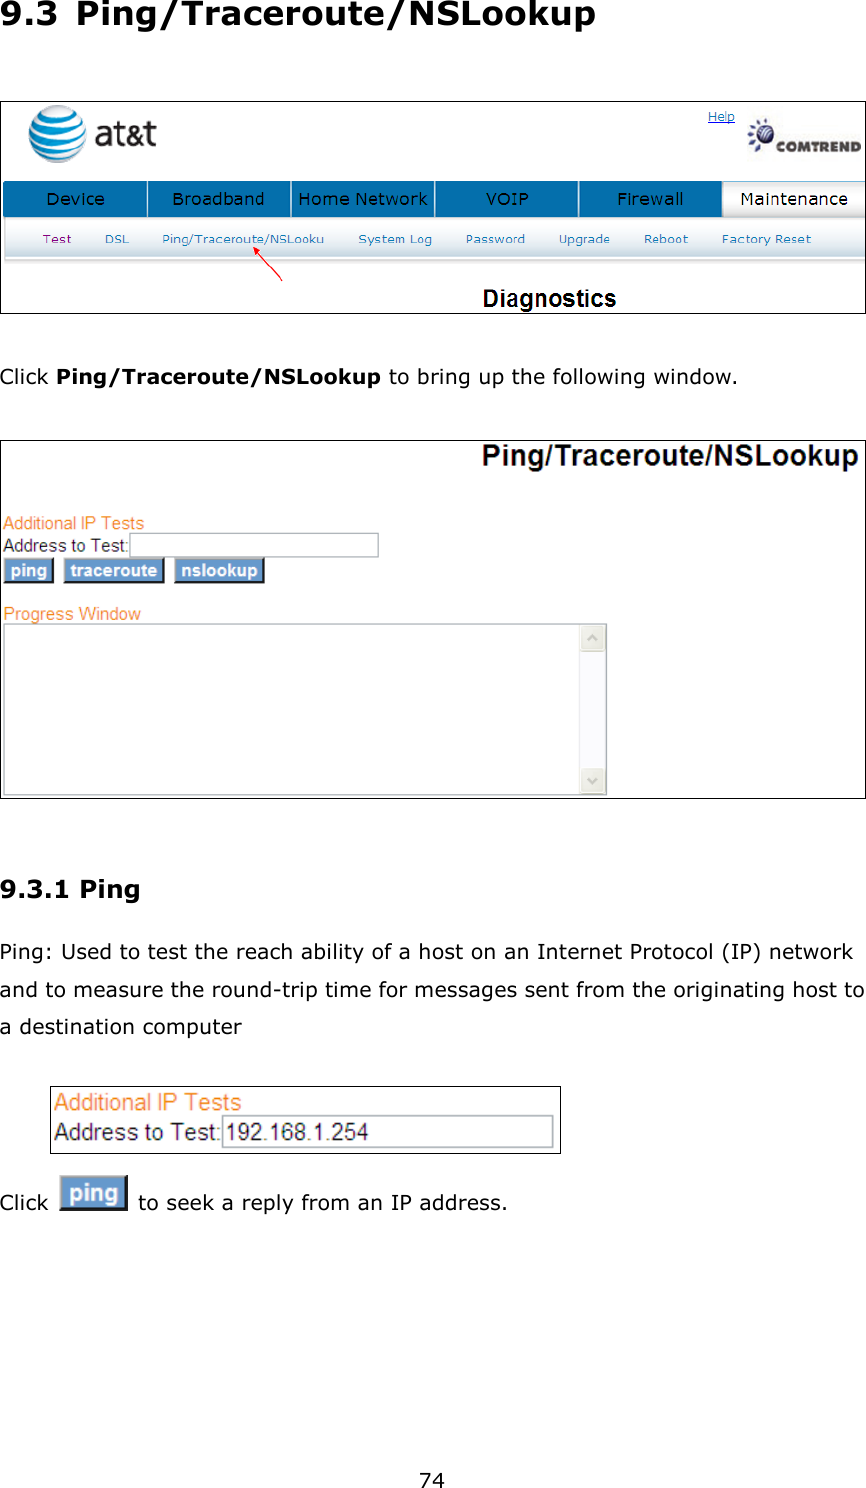 74 9.3  Ping/Traceroute/NSLookup    Click Ping/Traceroute/NSLookup to bring up the following window.    9.3.1 Ping Ping: Used to test the reach ability of a host on an Internet Protocol (IP) network and to measure the round-trip time for messages sent from the originating host to a destination computer   Click    to seek a reply from an IP address. 